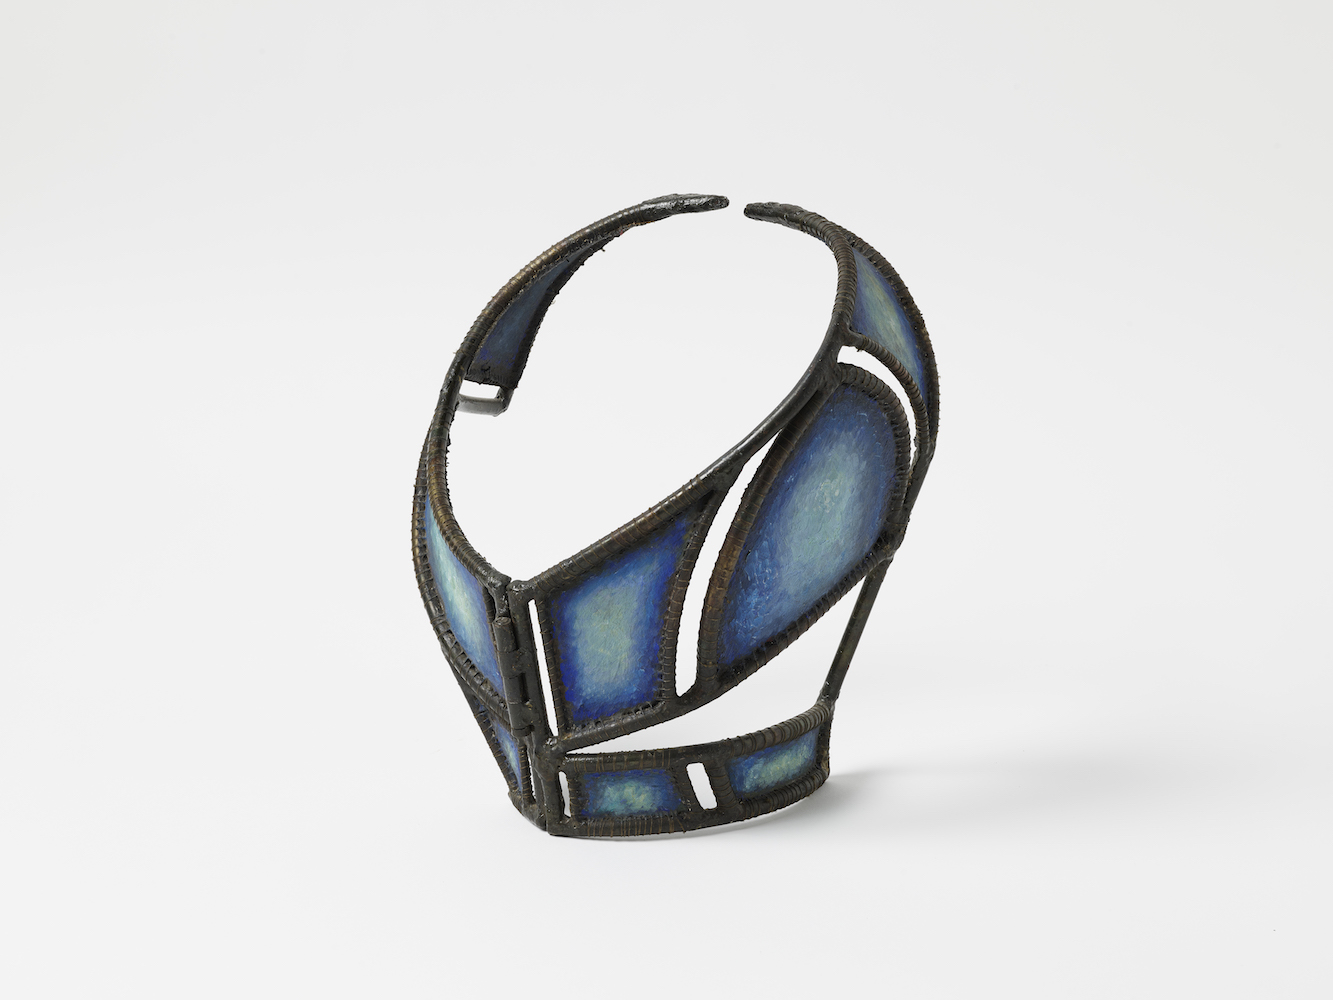   Necklace , 1984  Steel, fabric, 12.5” x 14” x 8” 